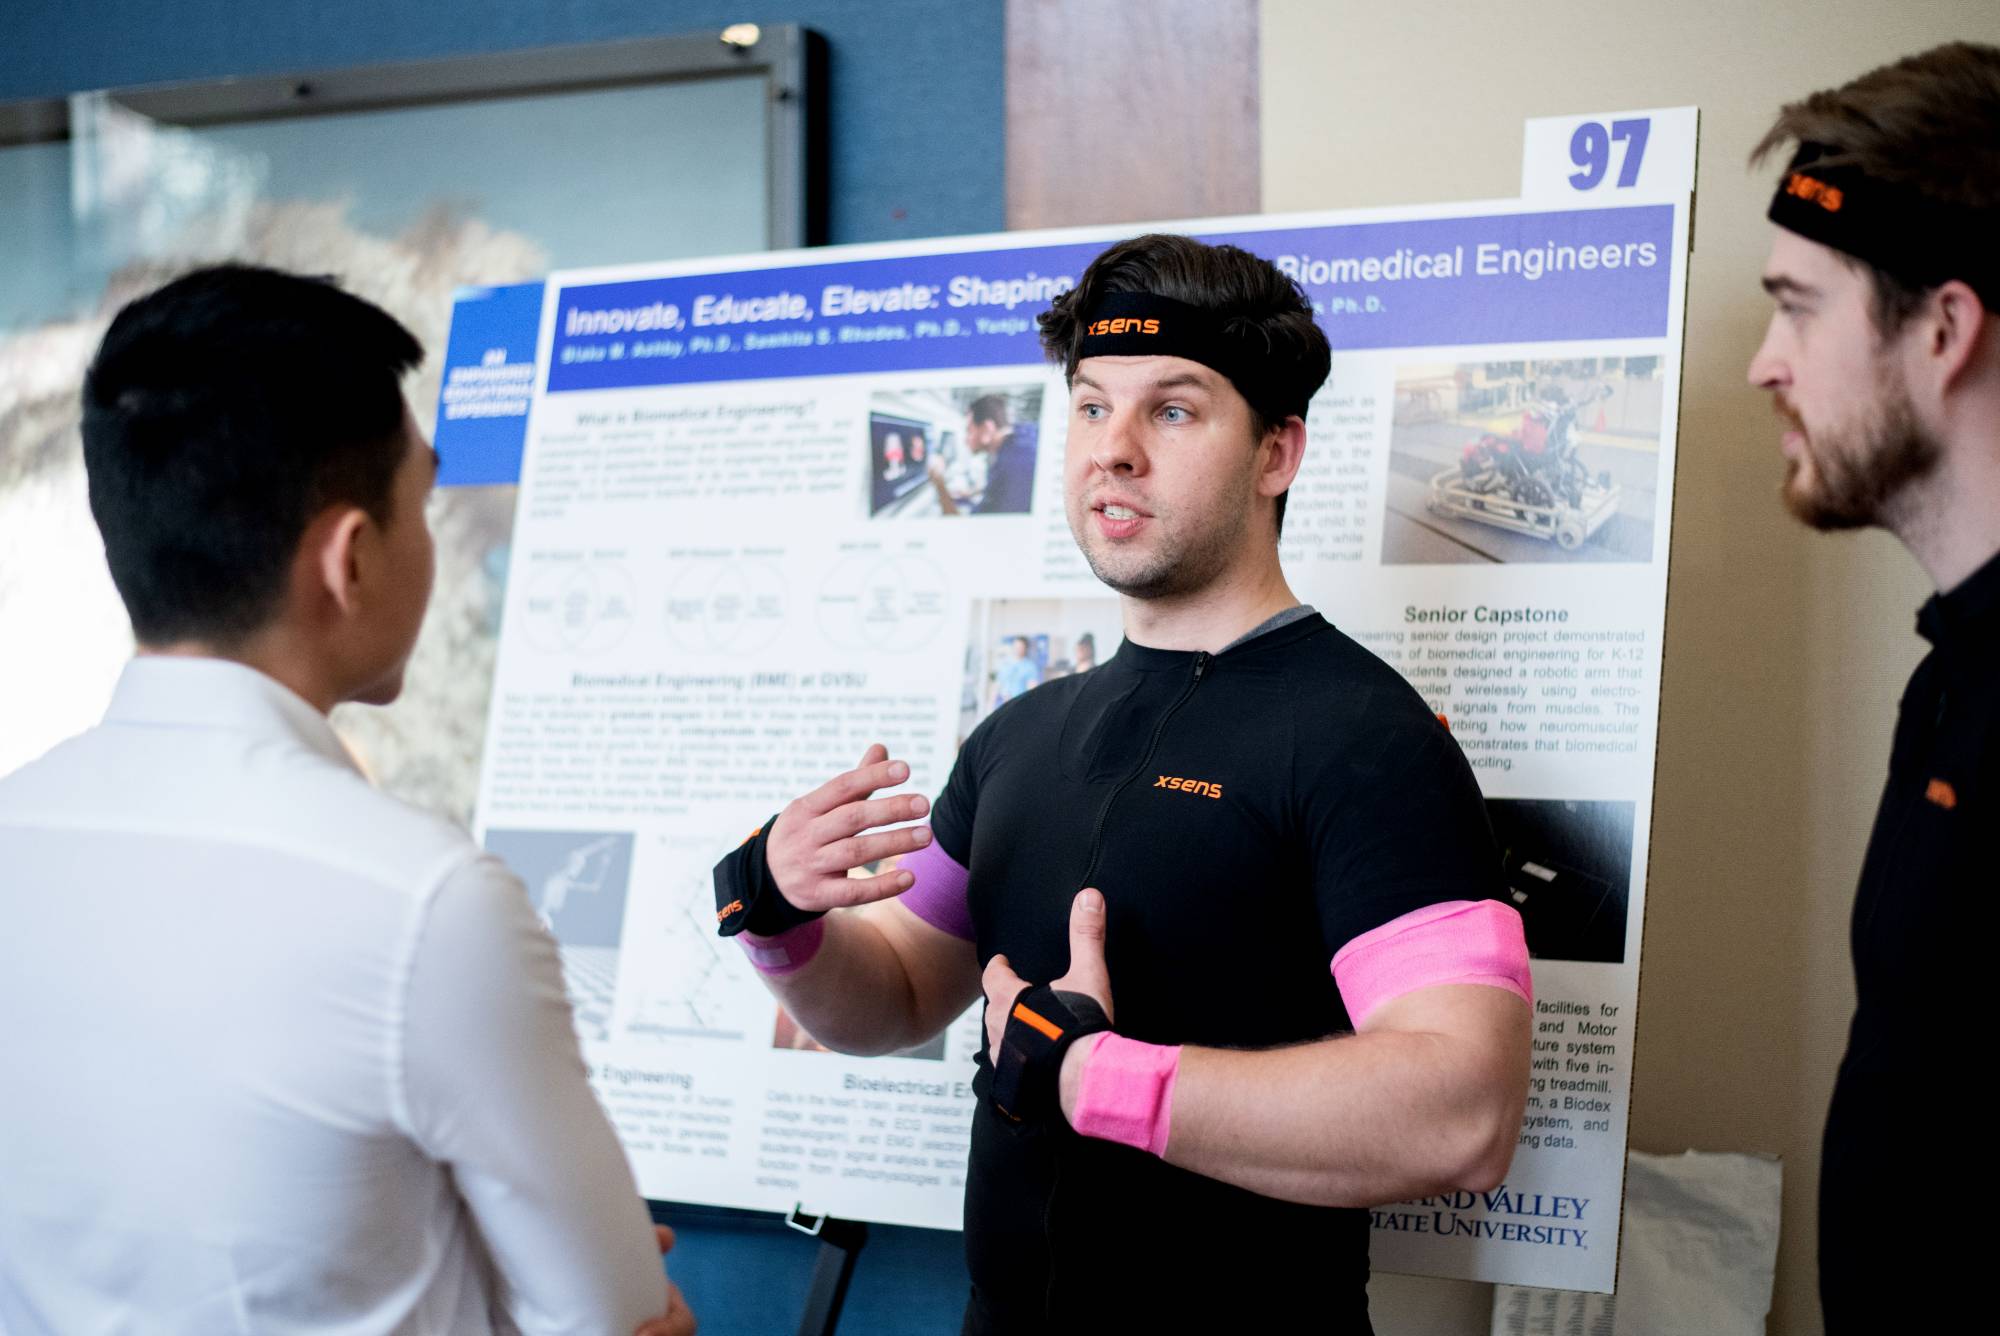 Student presents poster on biomechanical research at conference